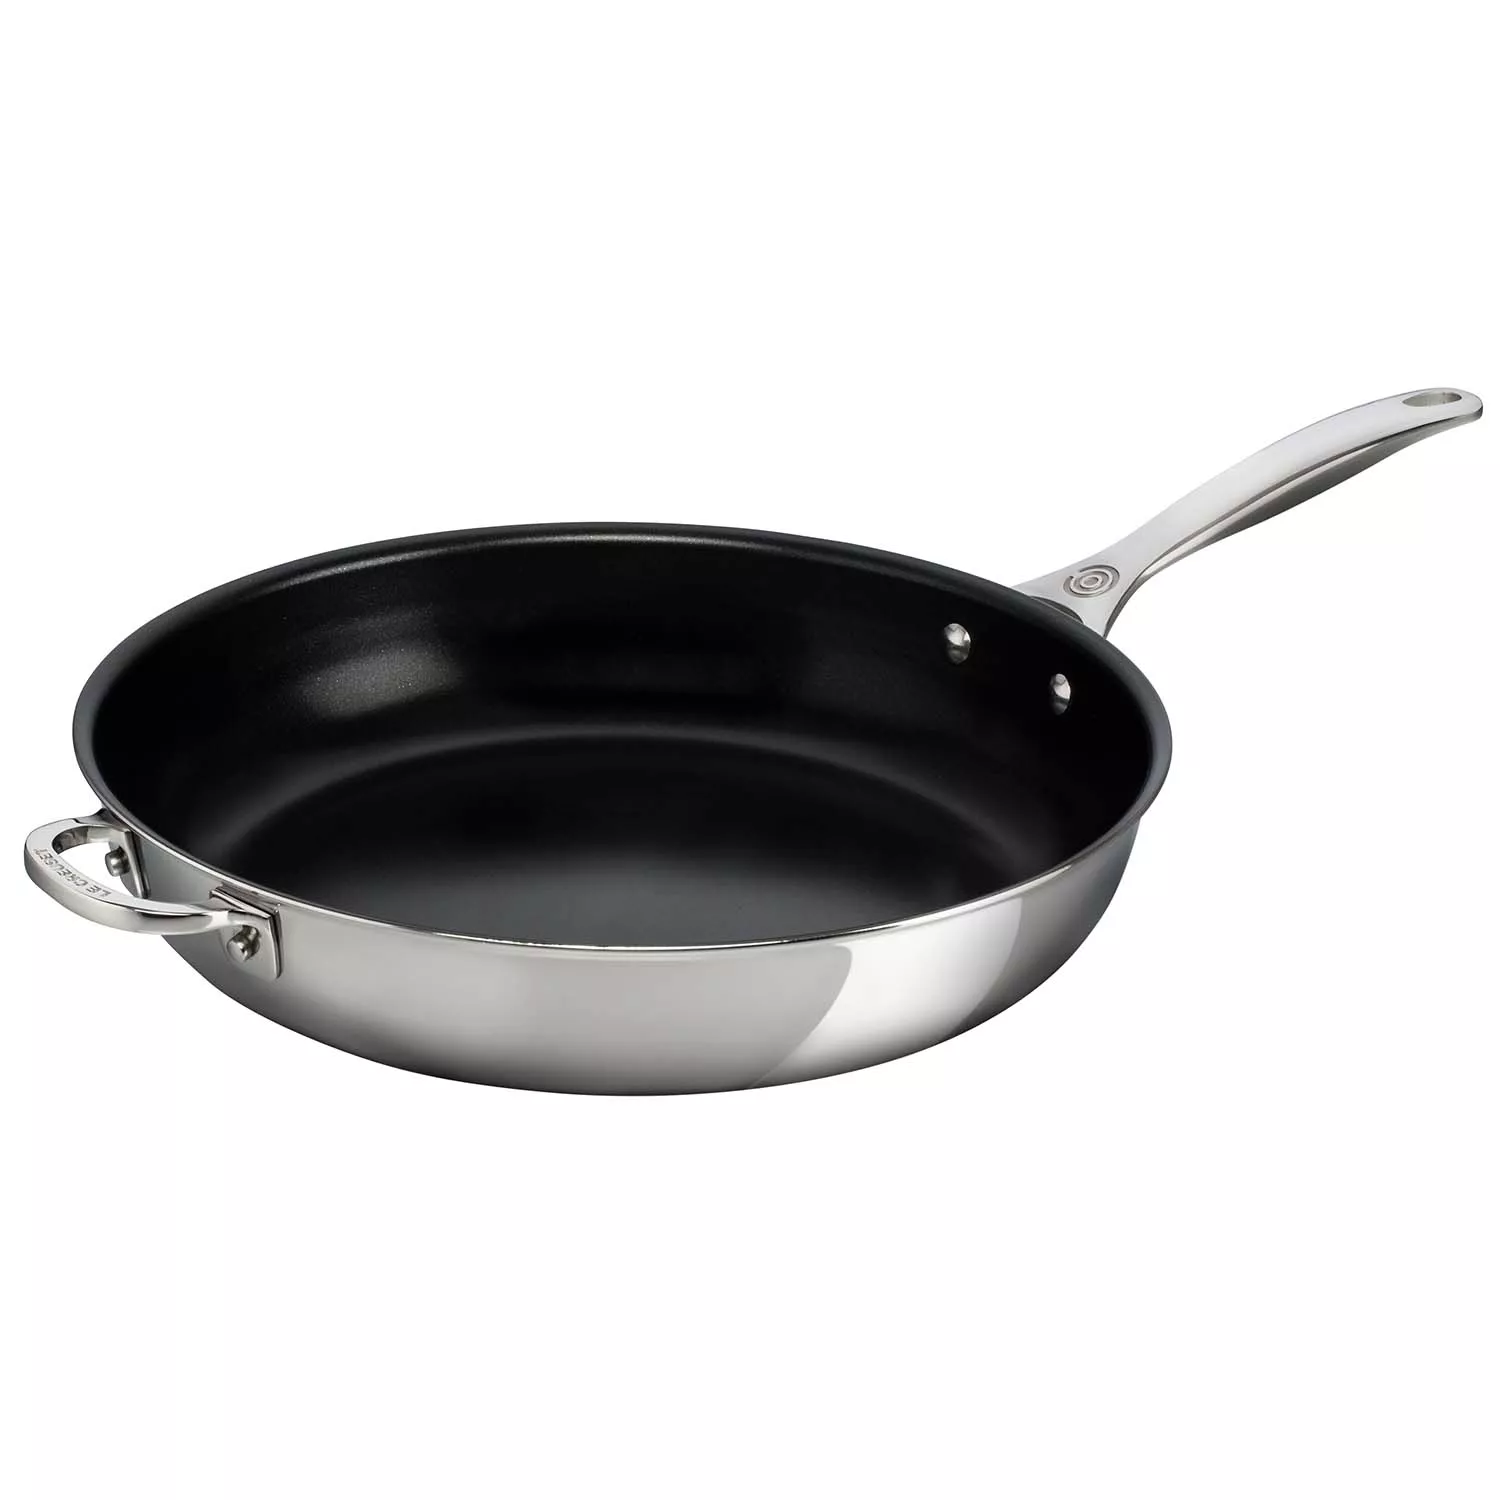 Photos - Pan Le Creuset Stainless Steel Nonstick Skillet 54101032001001 